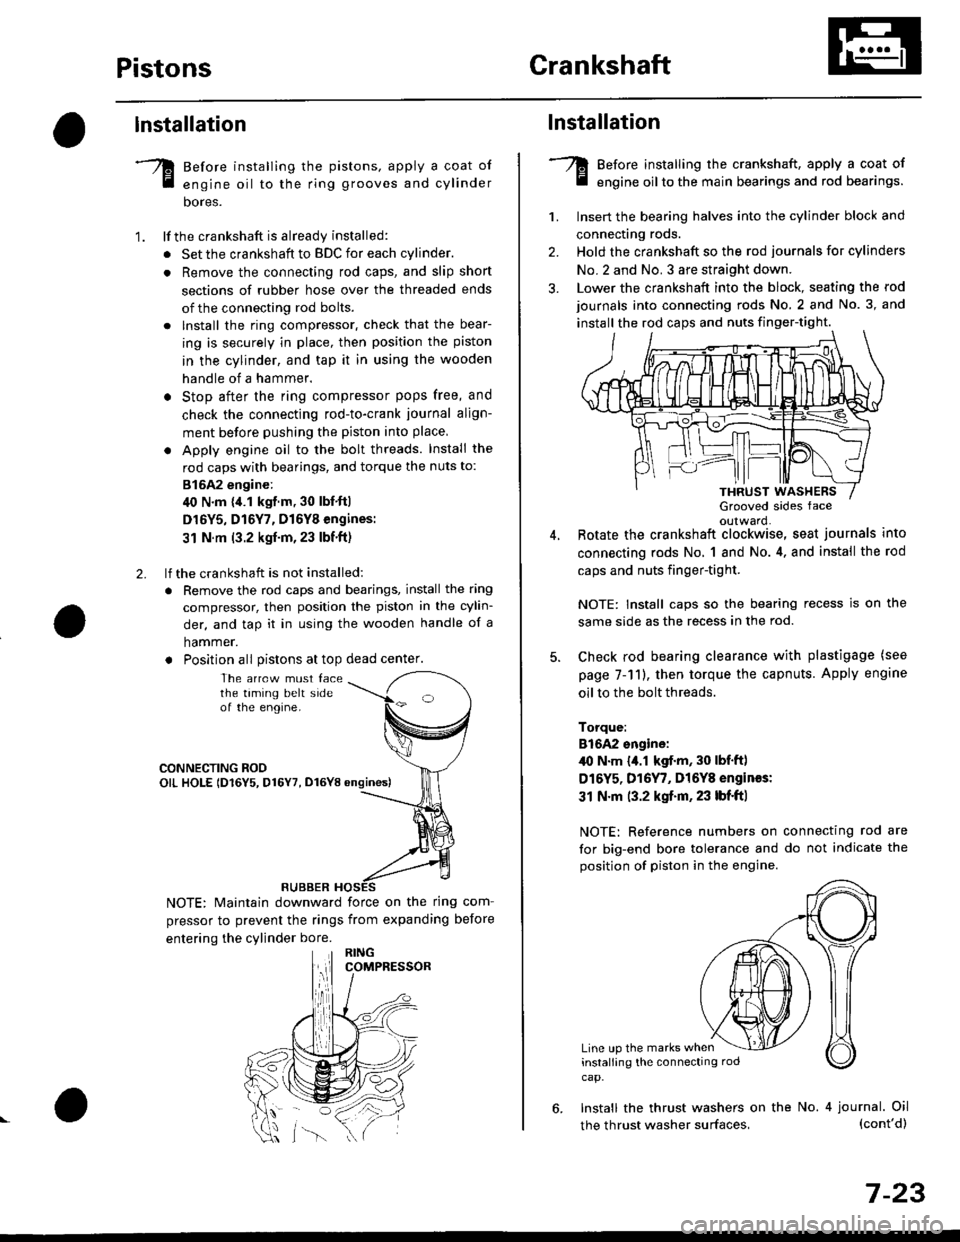 HONDA CIVIC 1996 6.G Service Manual PistonsGrankshaft
lnstallation
Before installing the pistons, apply a coat of
engine oil to the ring grooves and cylinder
bores.
lf the crankshaft is already installed:
. Set the crankshaft to BDC for